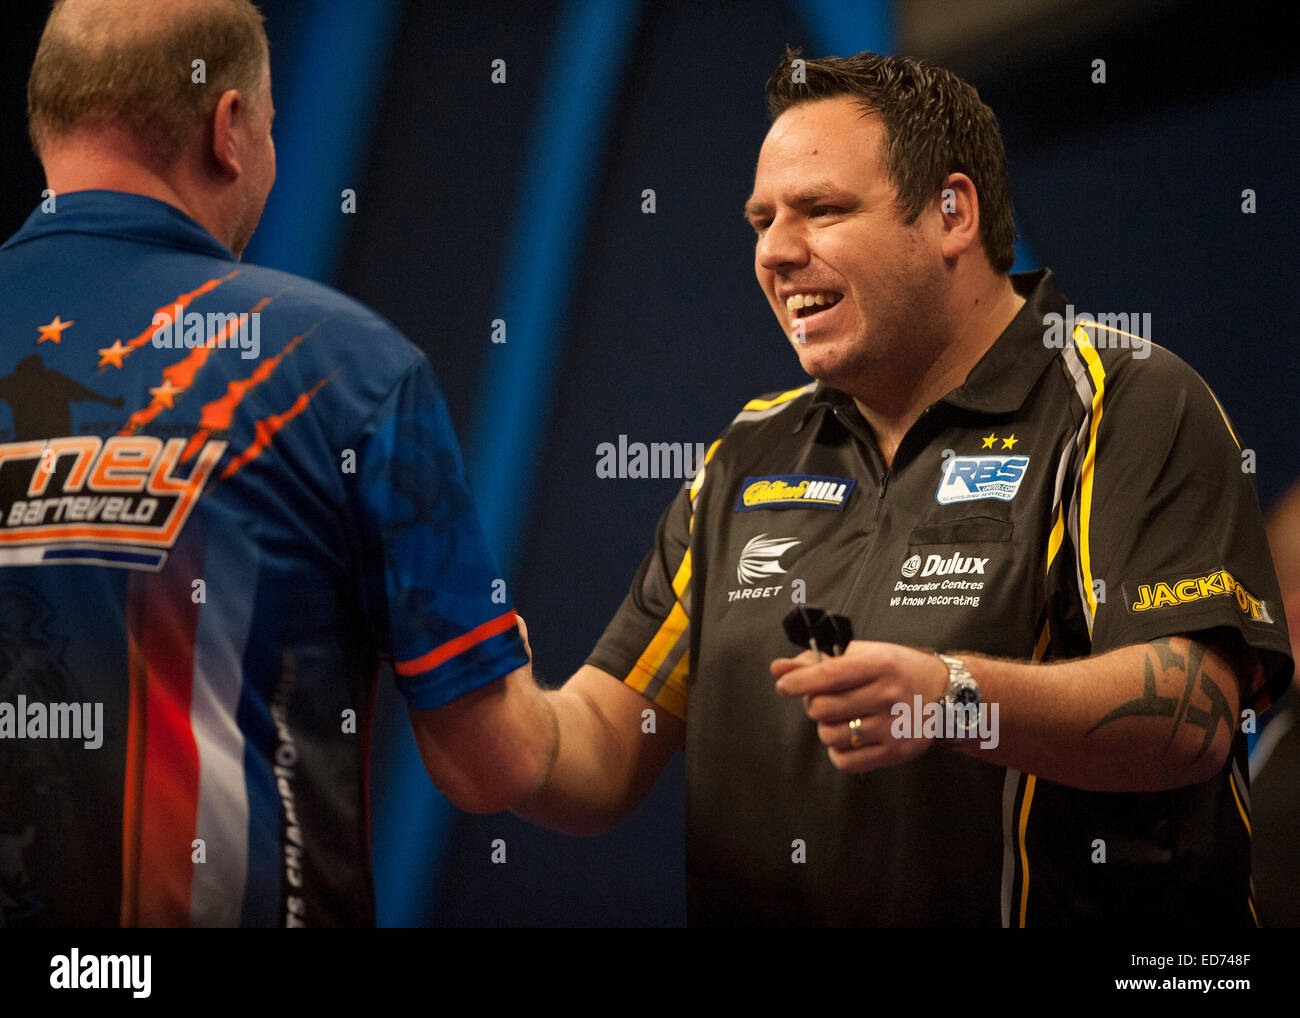 30.12.2014. Londres, Angleterre. William Hill PDC World Darts Championship. Raymond van Barneveld (14) [NED] félicite Adrian Lewis (3) [FRA] après Lewis hits un dart neuf terminer. Banque D'Images